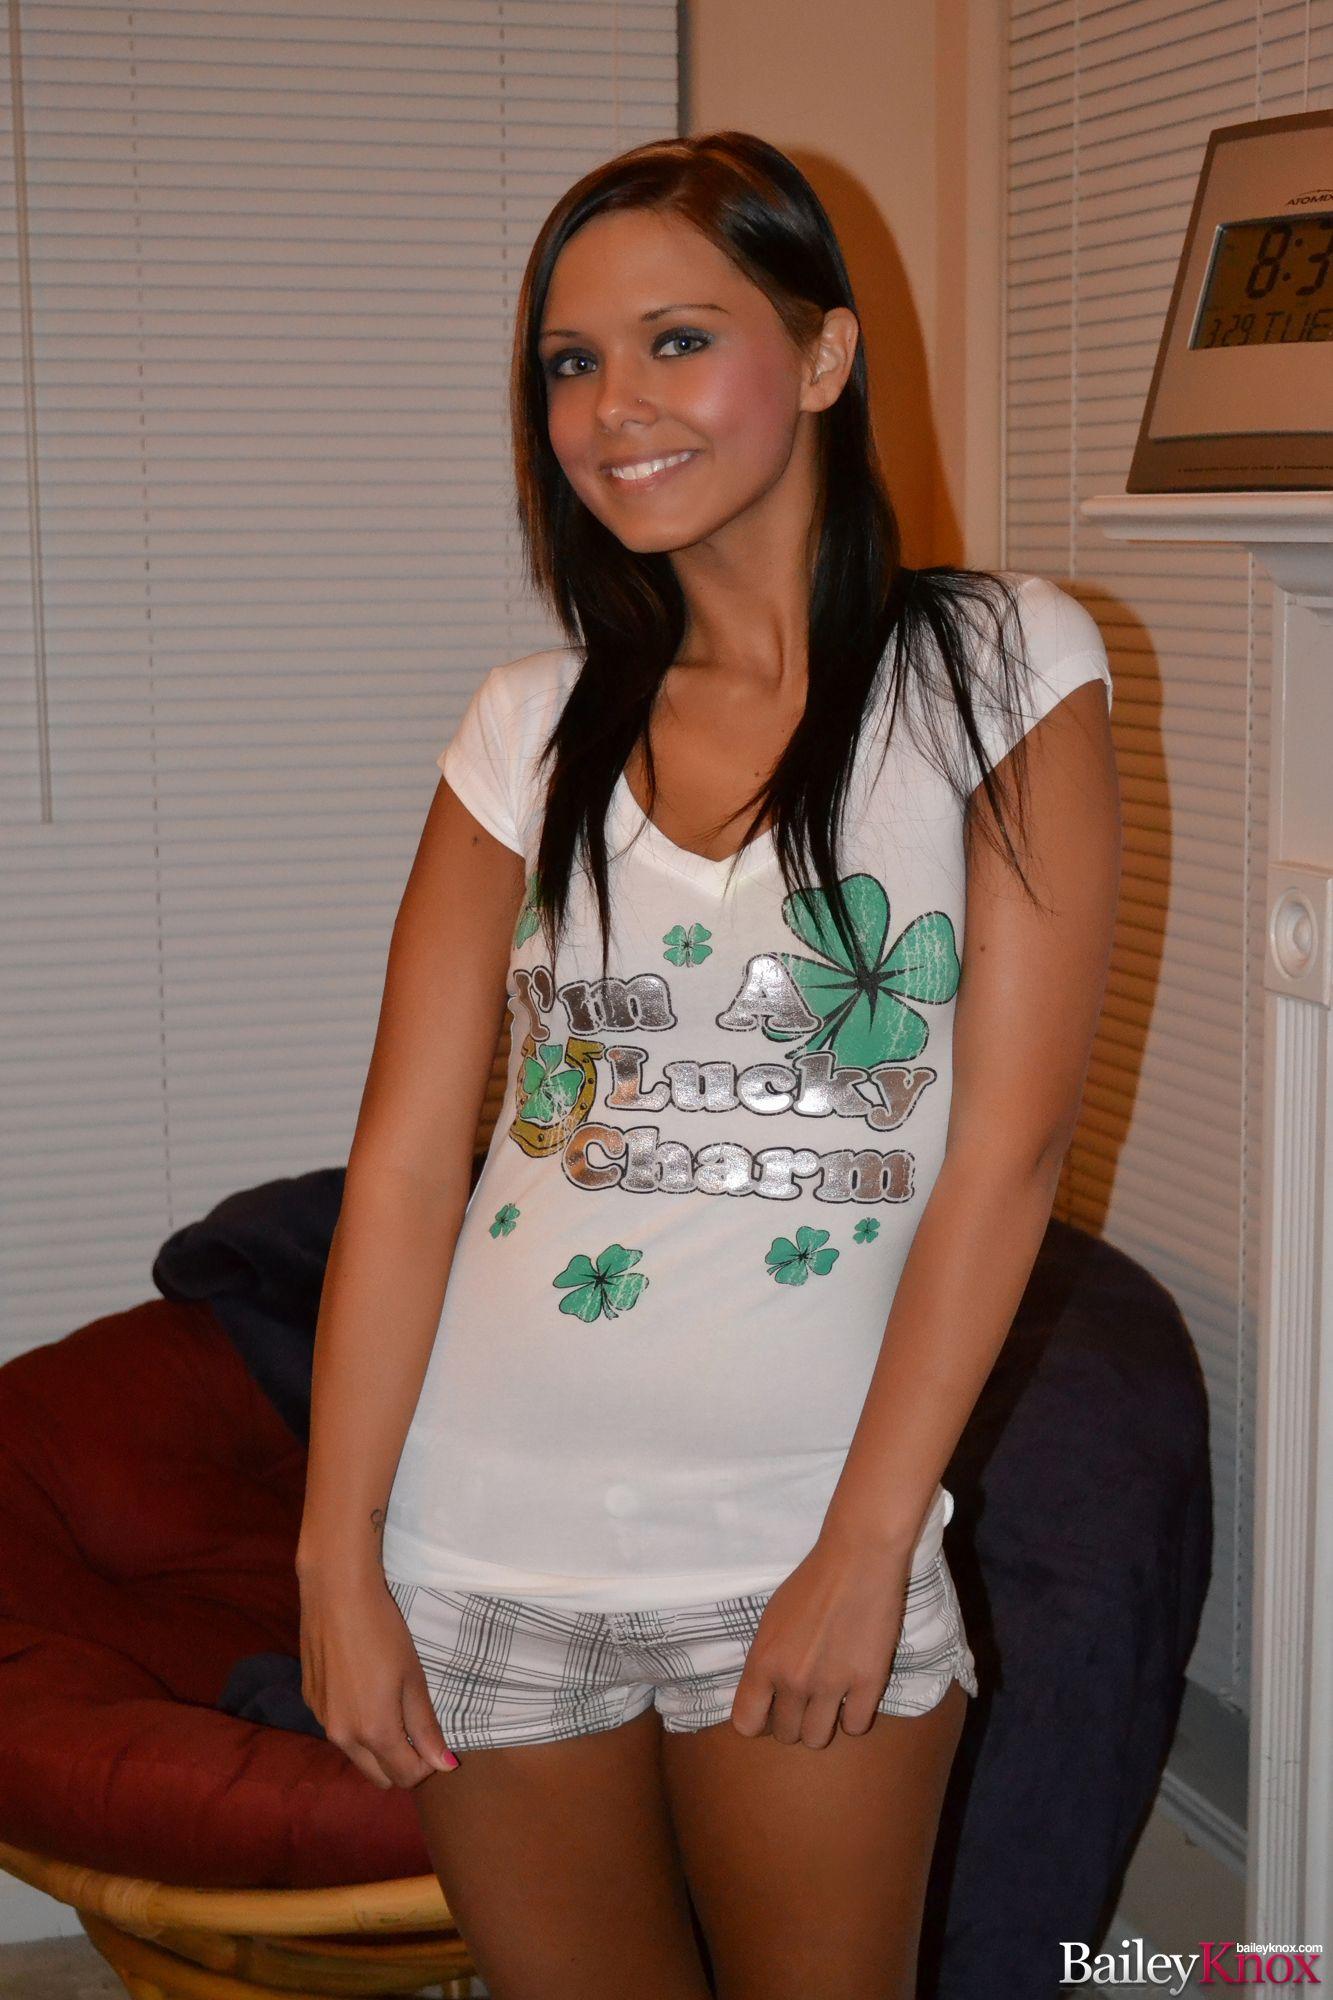 Pictures of Bailey Knox showing you her lucky charm #53400792